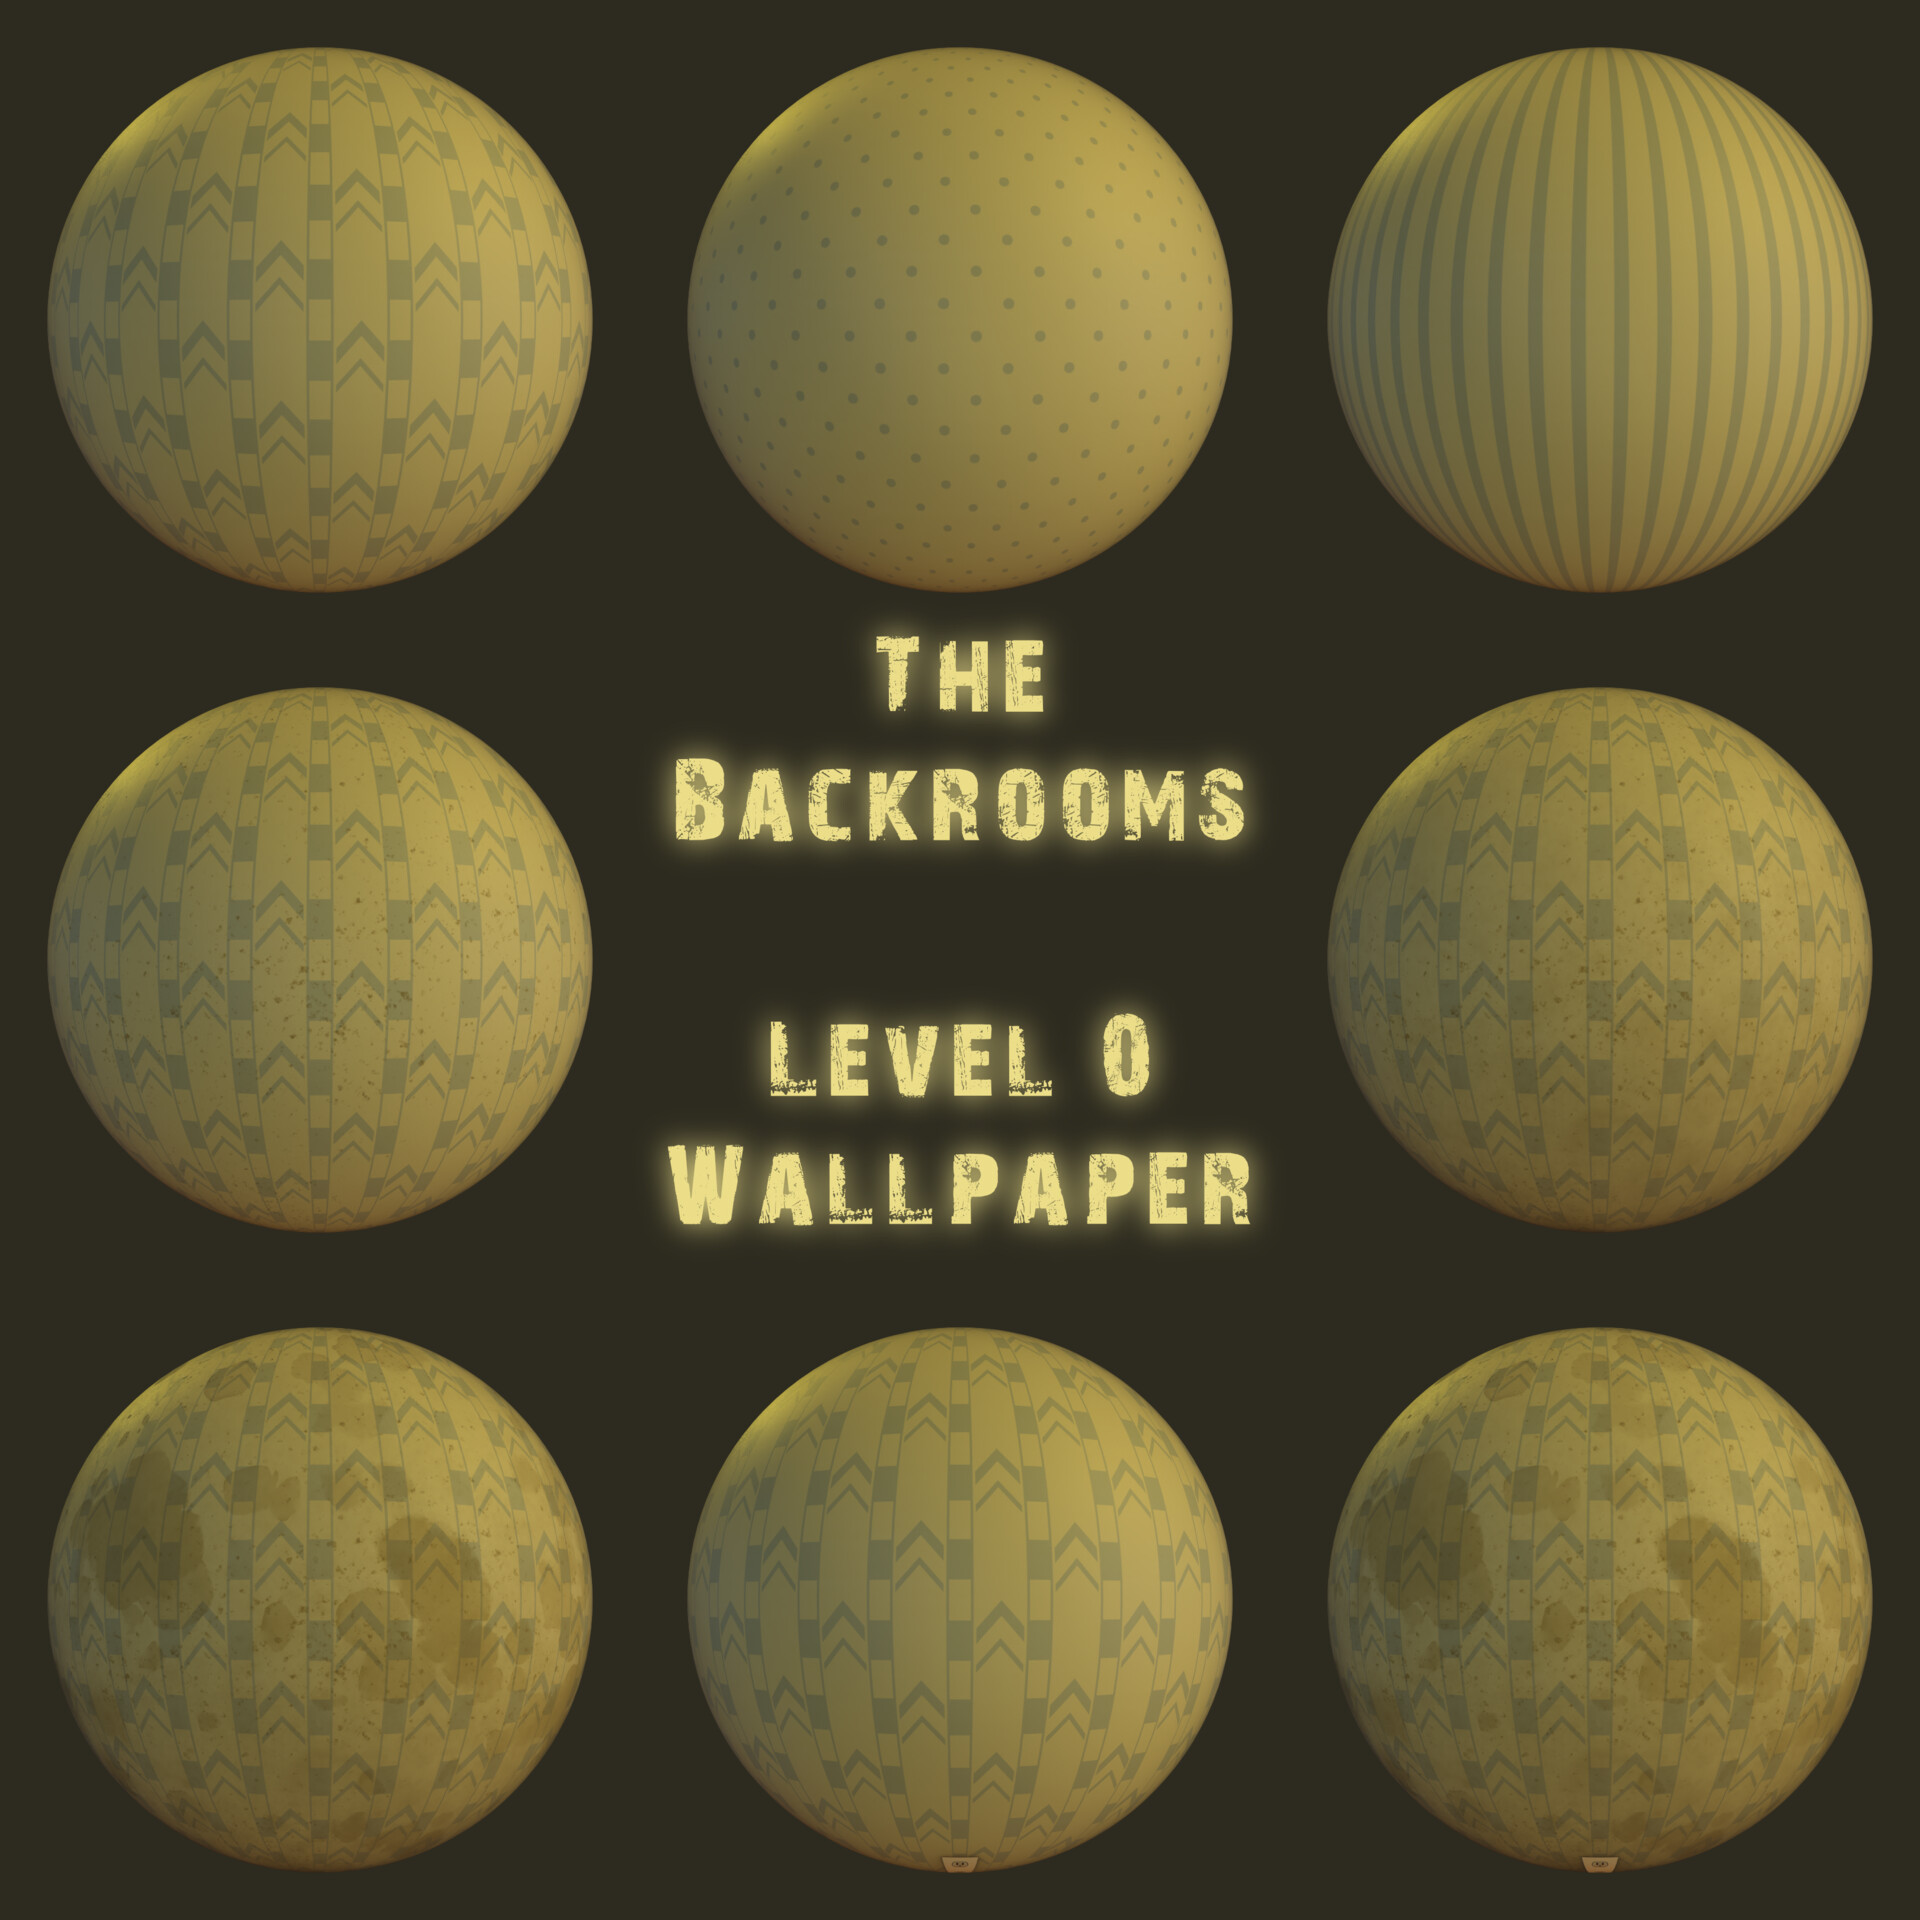 Level 5.1 - The Backrooms